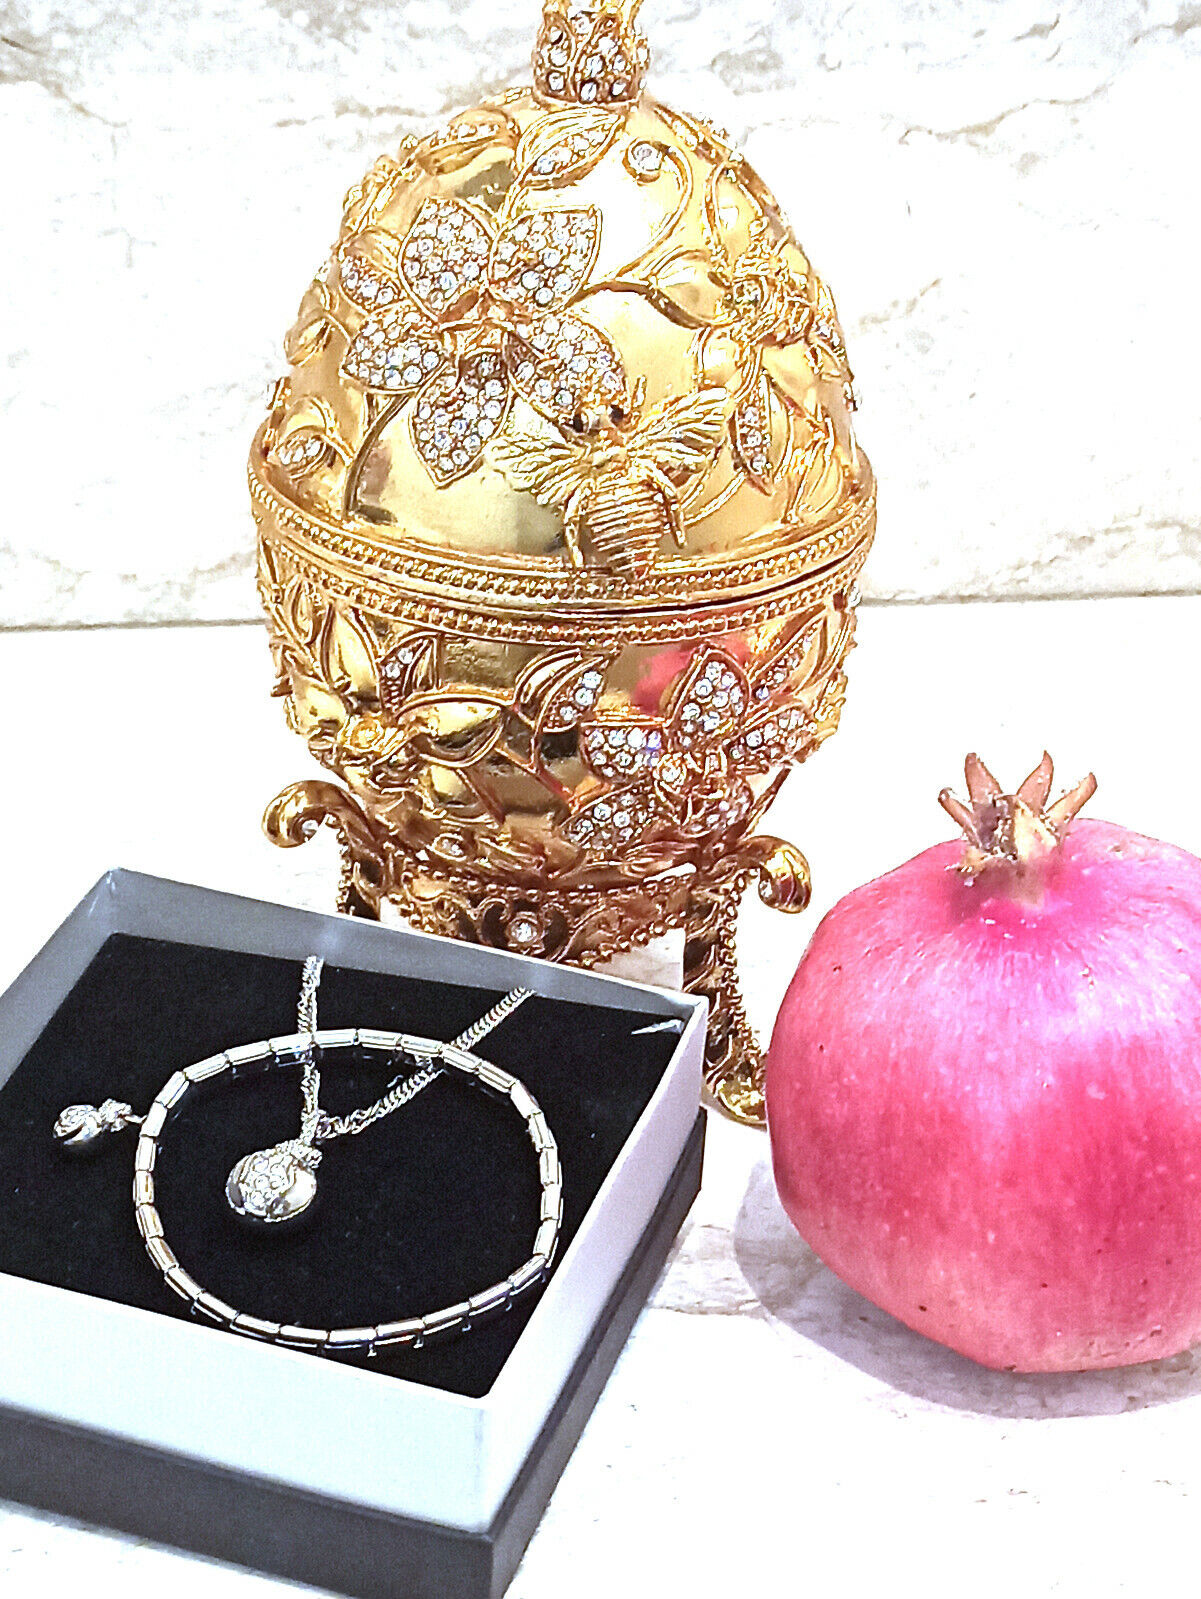 Christmas gift for wife Pomegranate Faberge Exquisite SET 24k GOLD HMDE 10ct 